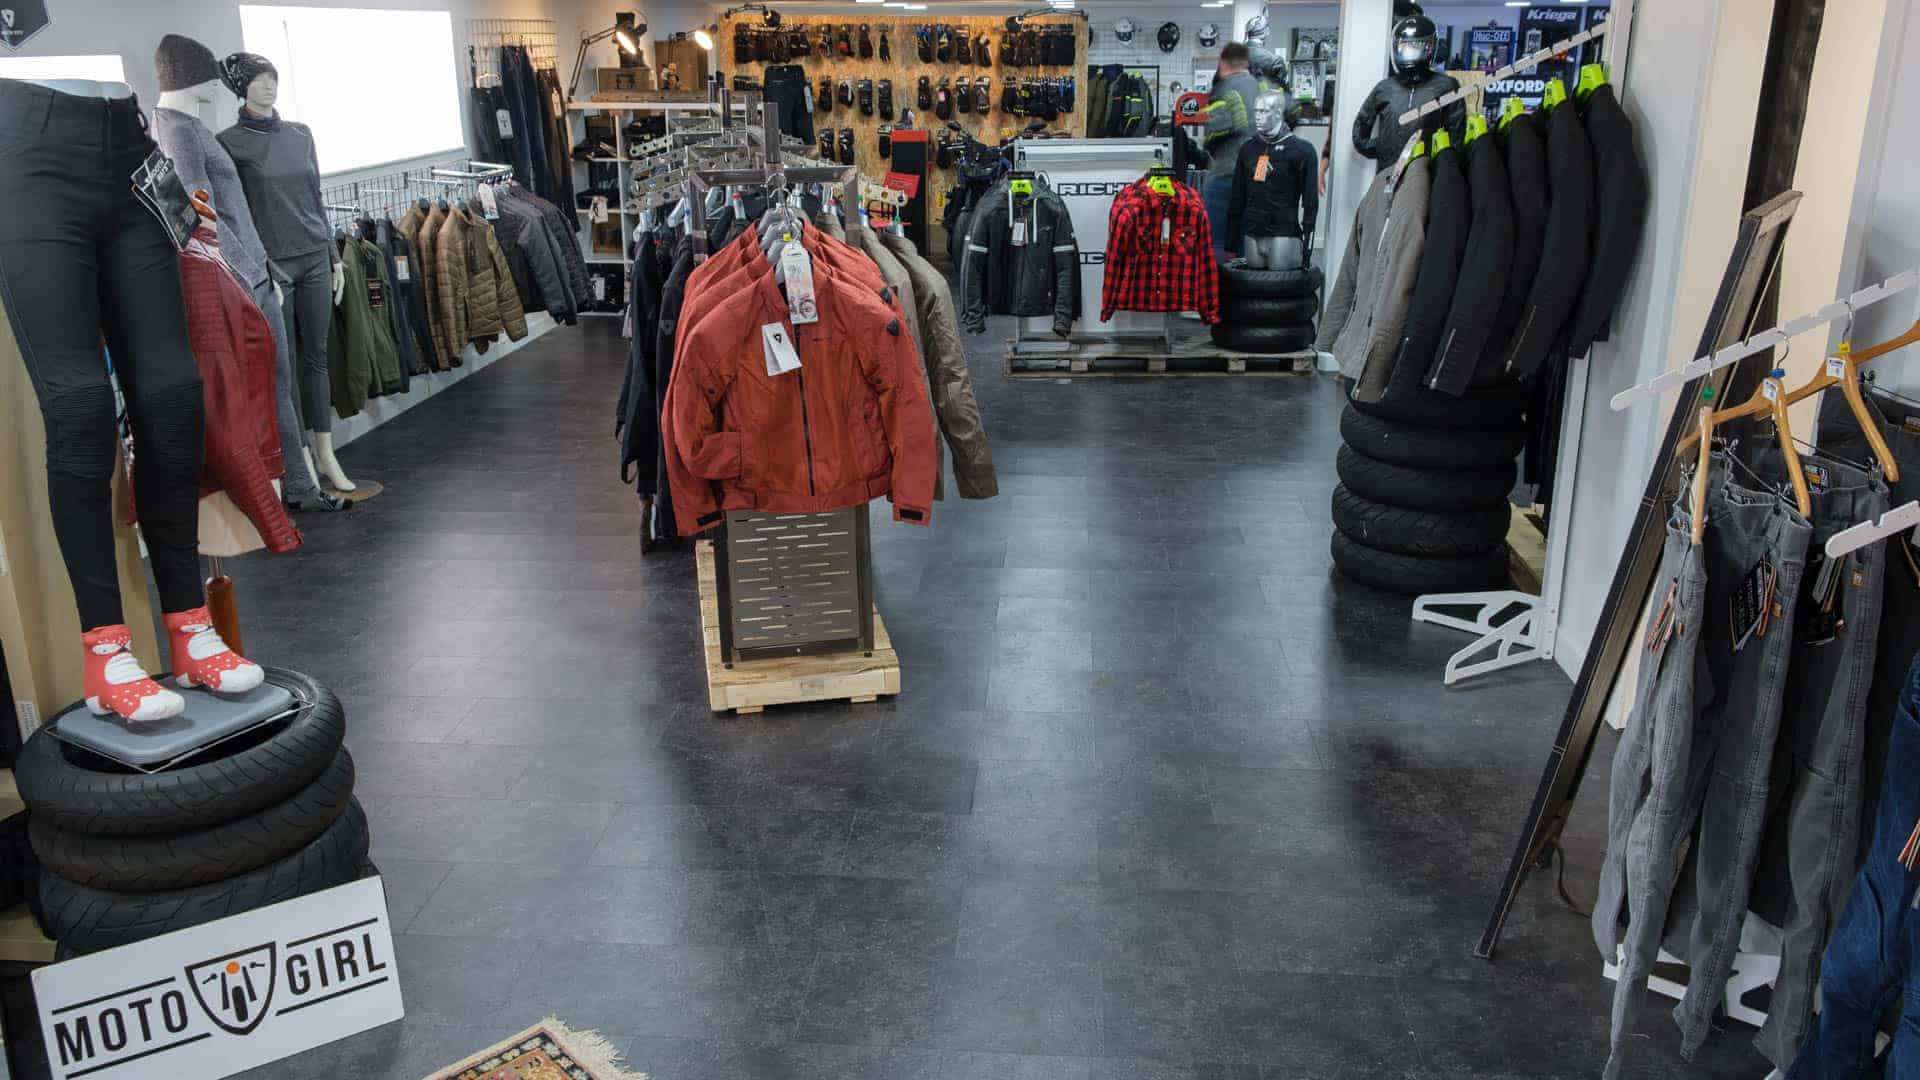 shop full of motorcycle clothing on display